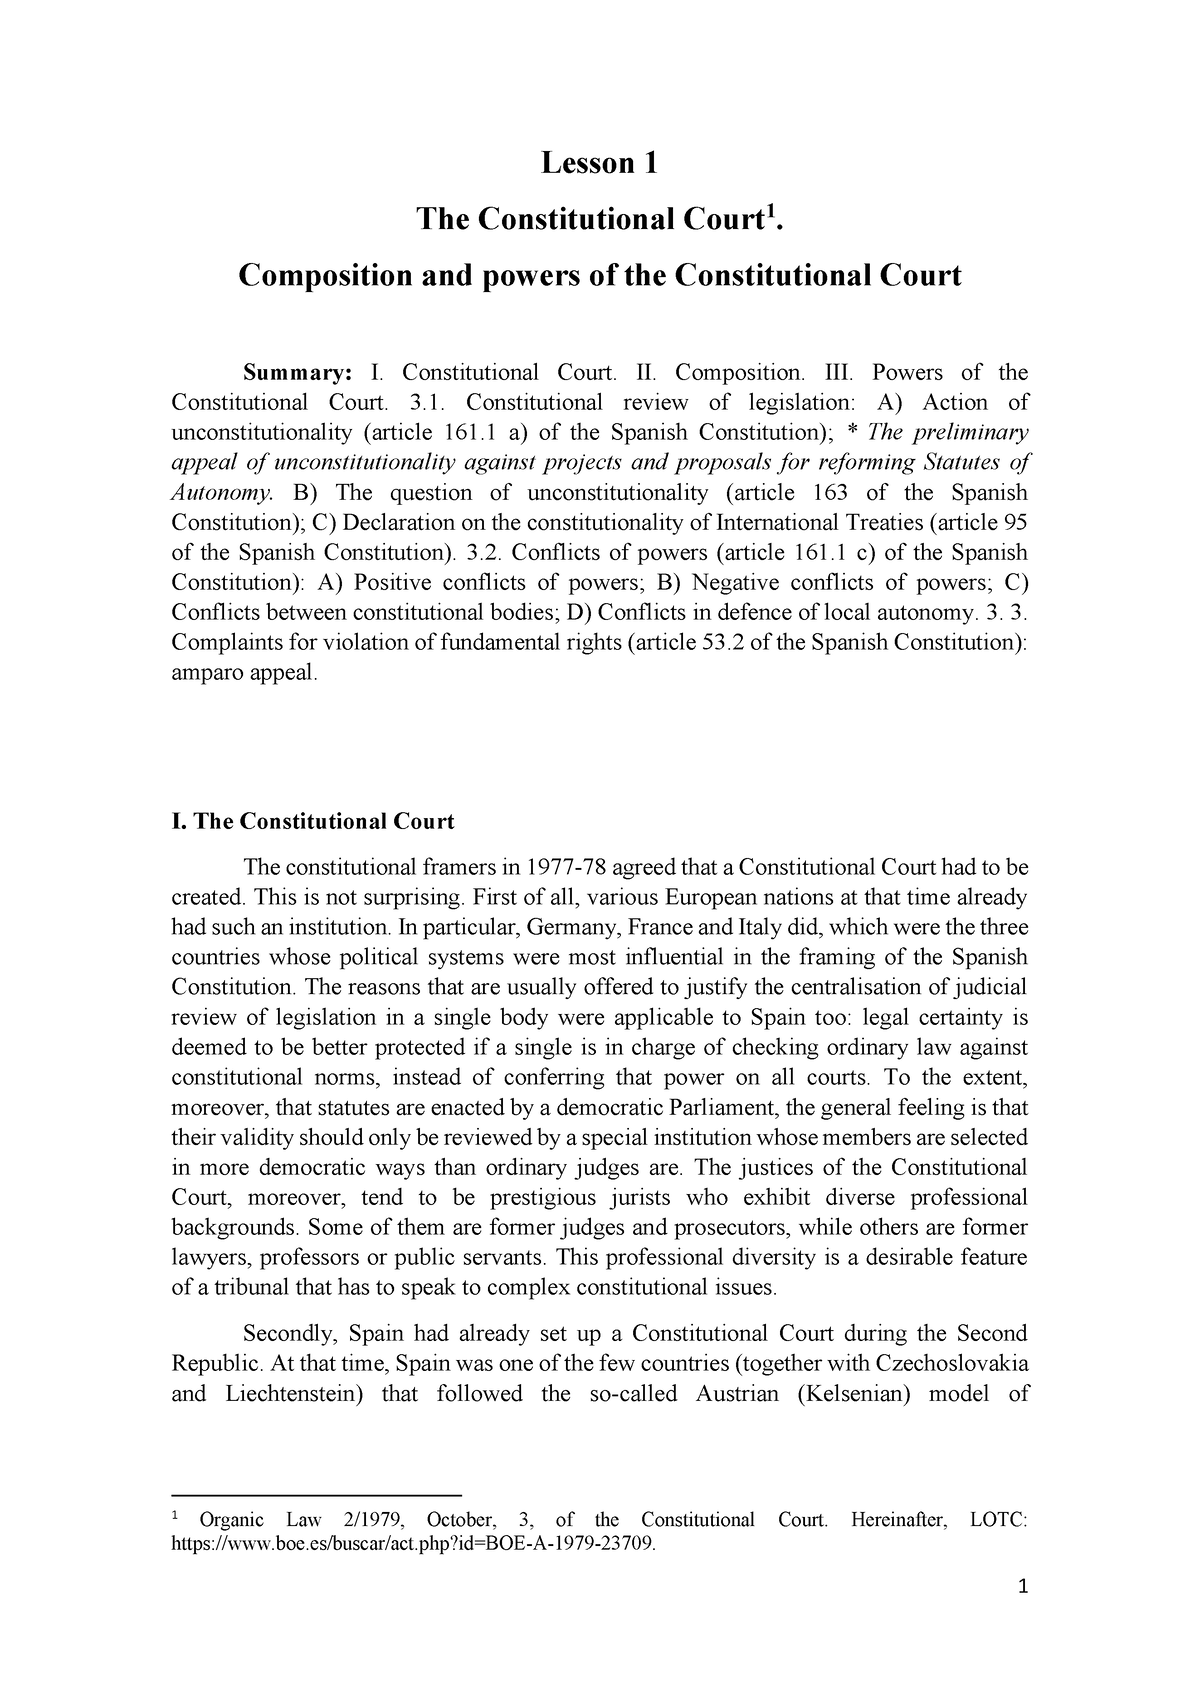 Lesson 1 Spanish Constitutional Court Composition and functions